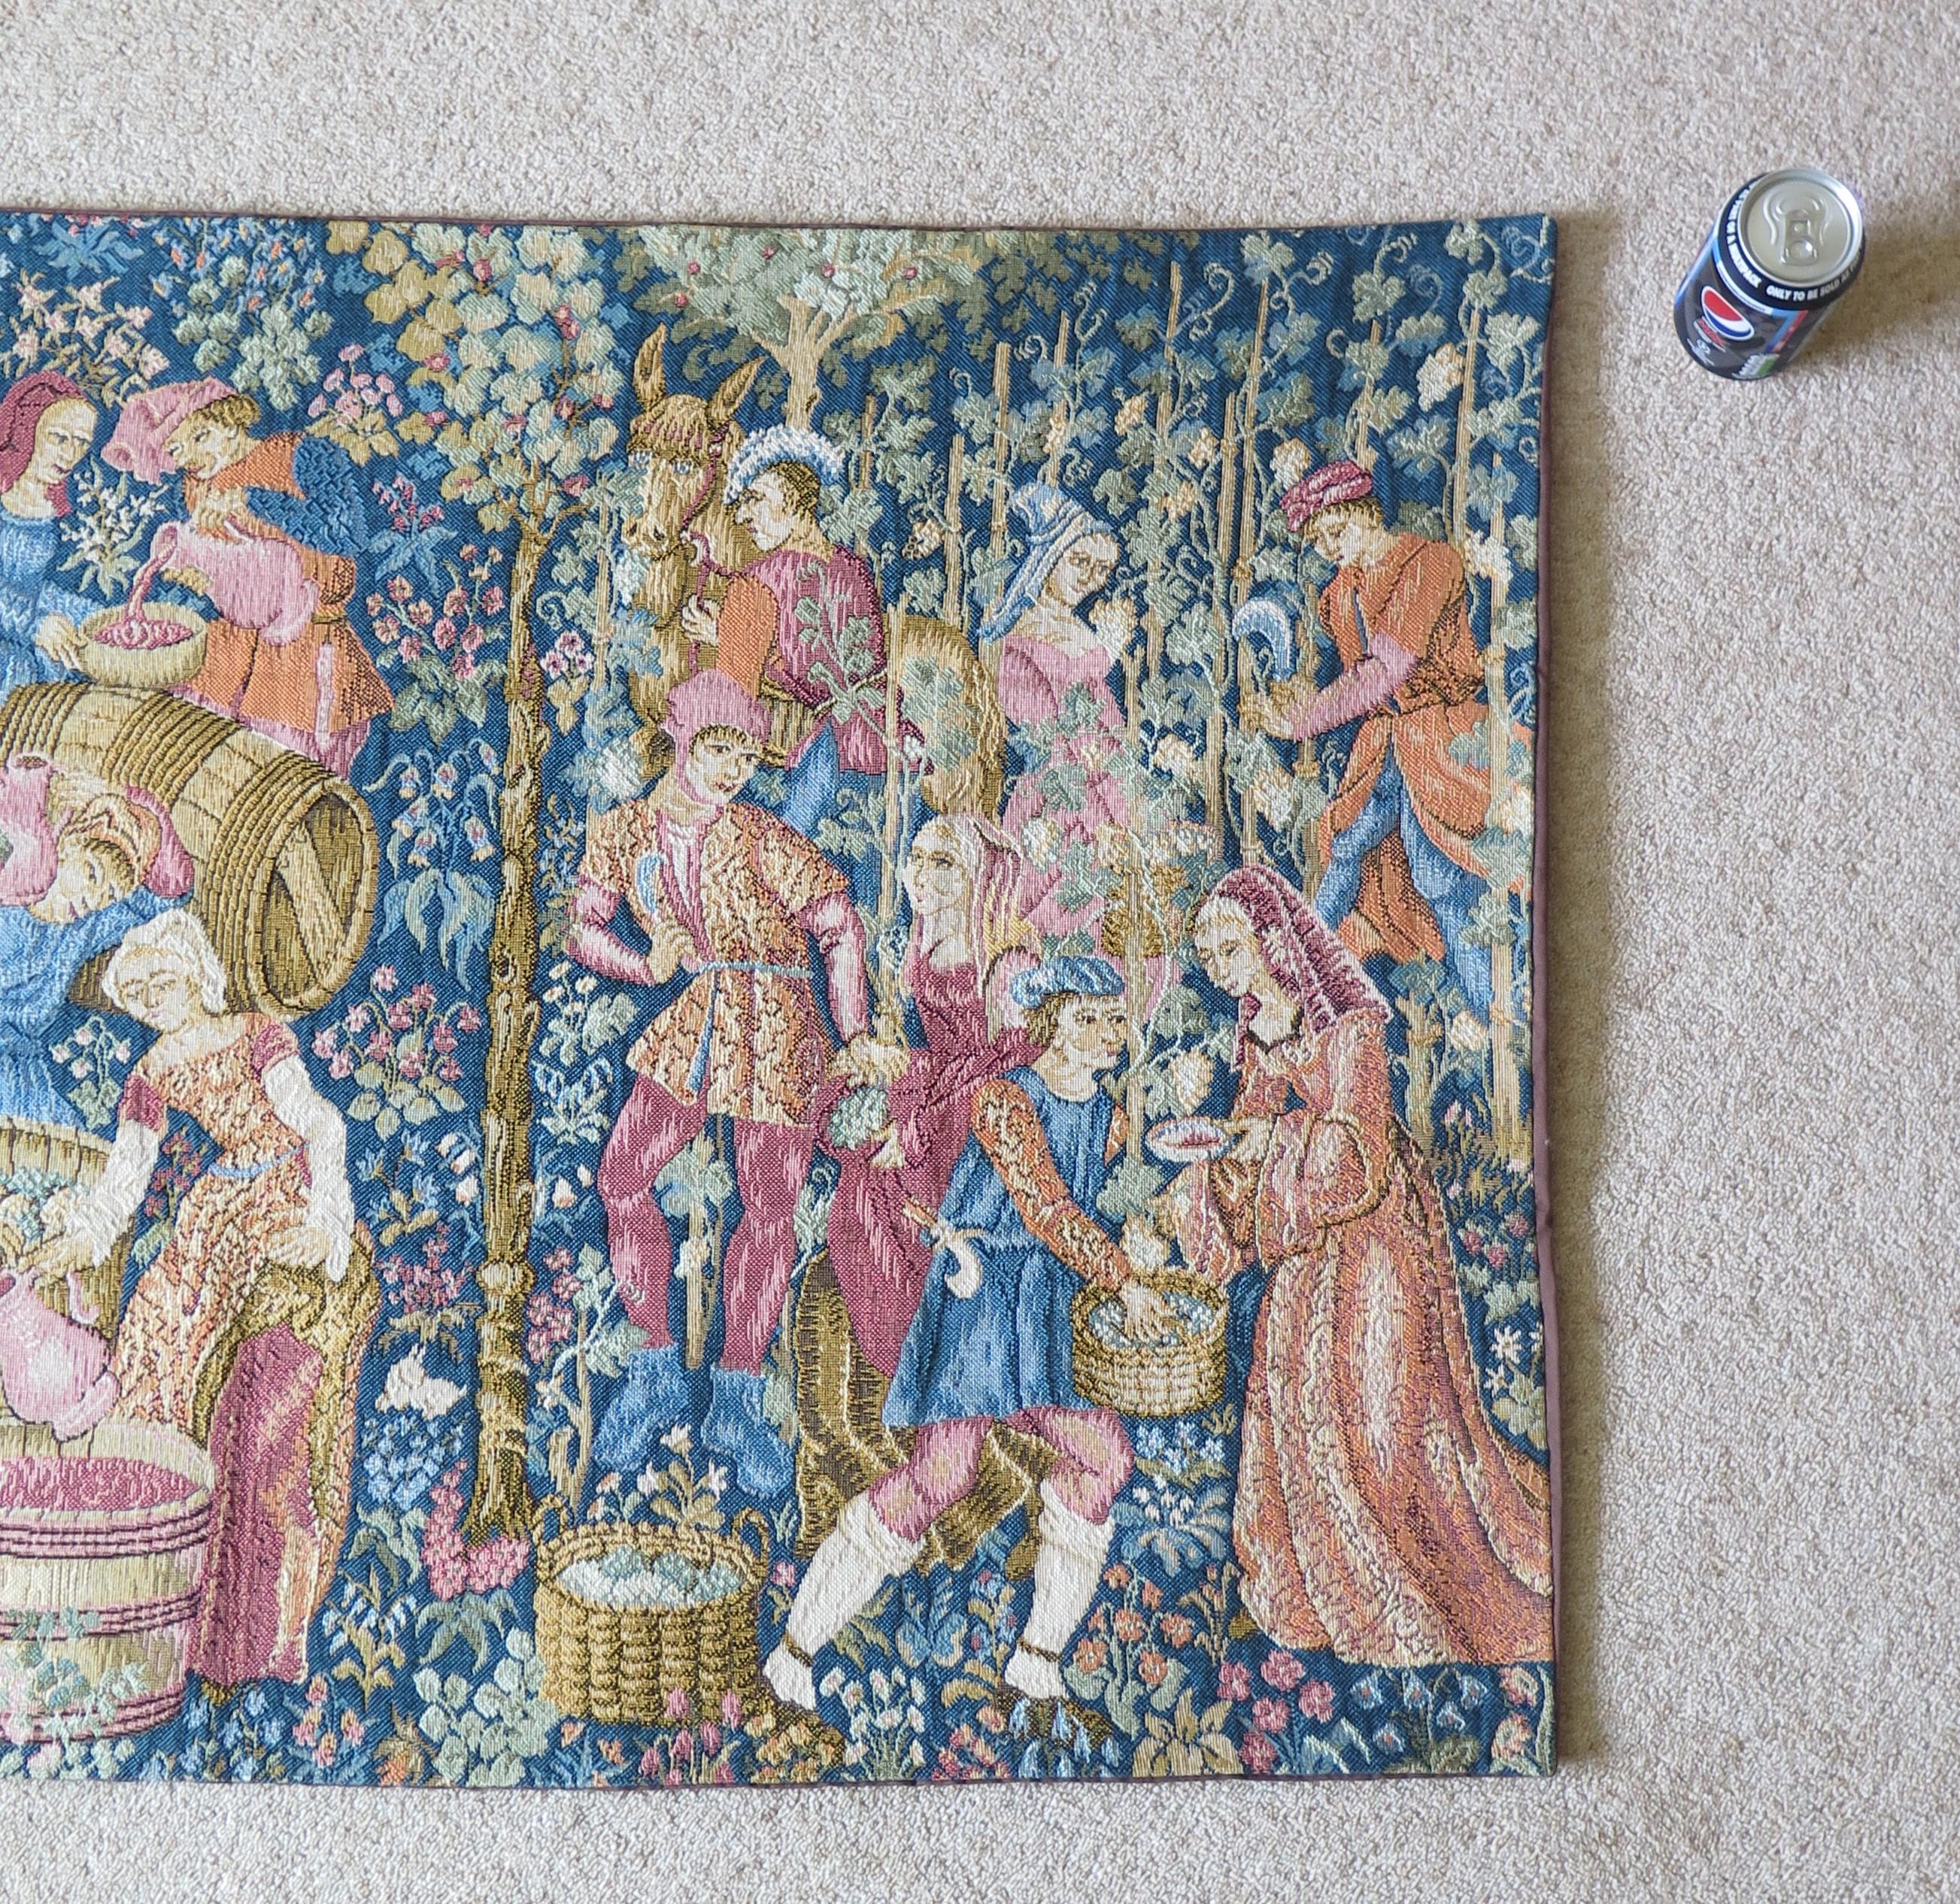 Woven Wall Hanging Tapestry Depicting Wine Making, French, 20th Century 12